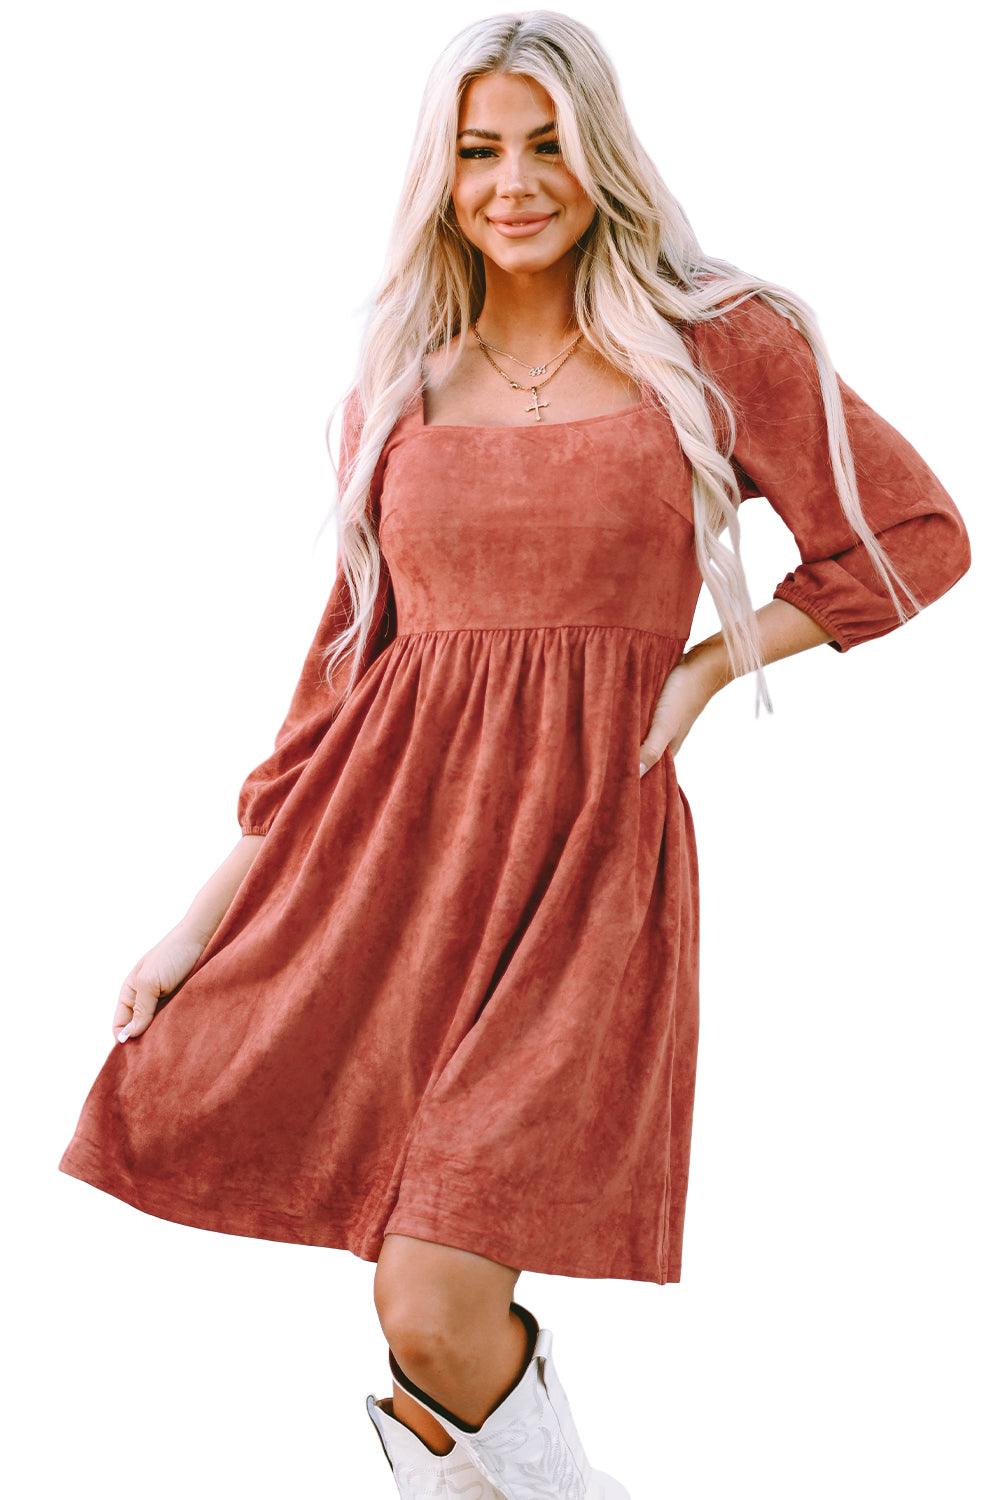 Brown Suede Square Neck Puff Sleeve Dress - L & M Kee, LLC